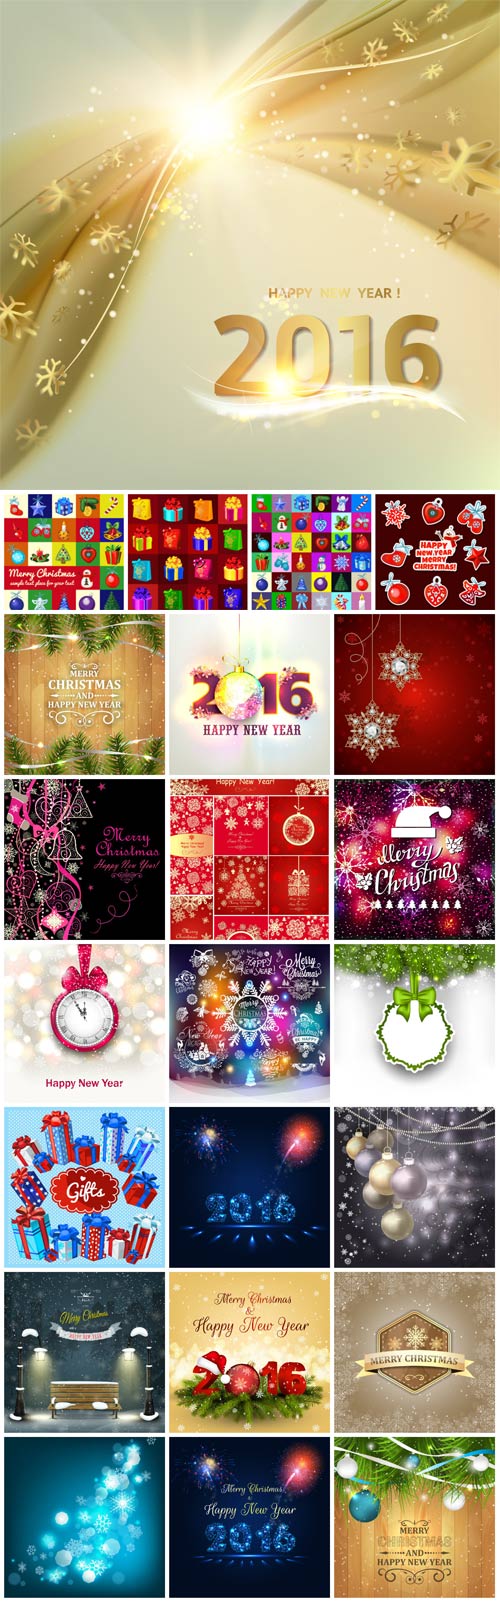 2016 Merry Christmas, New Year, holiday, backgrounds vector #2